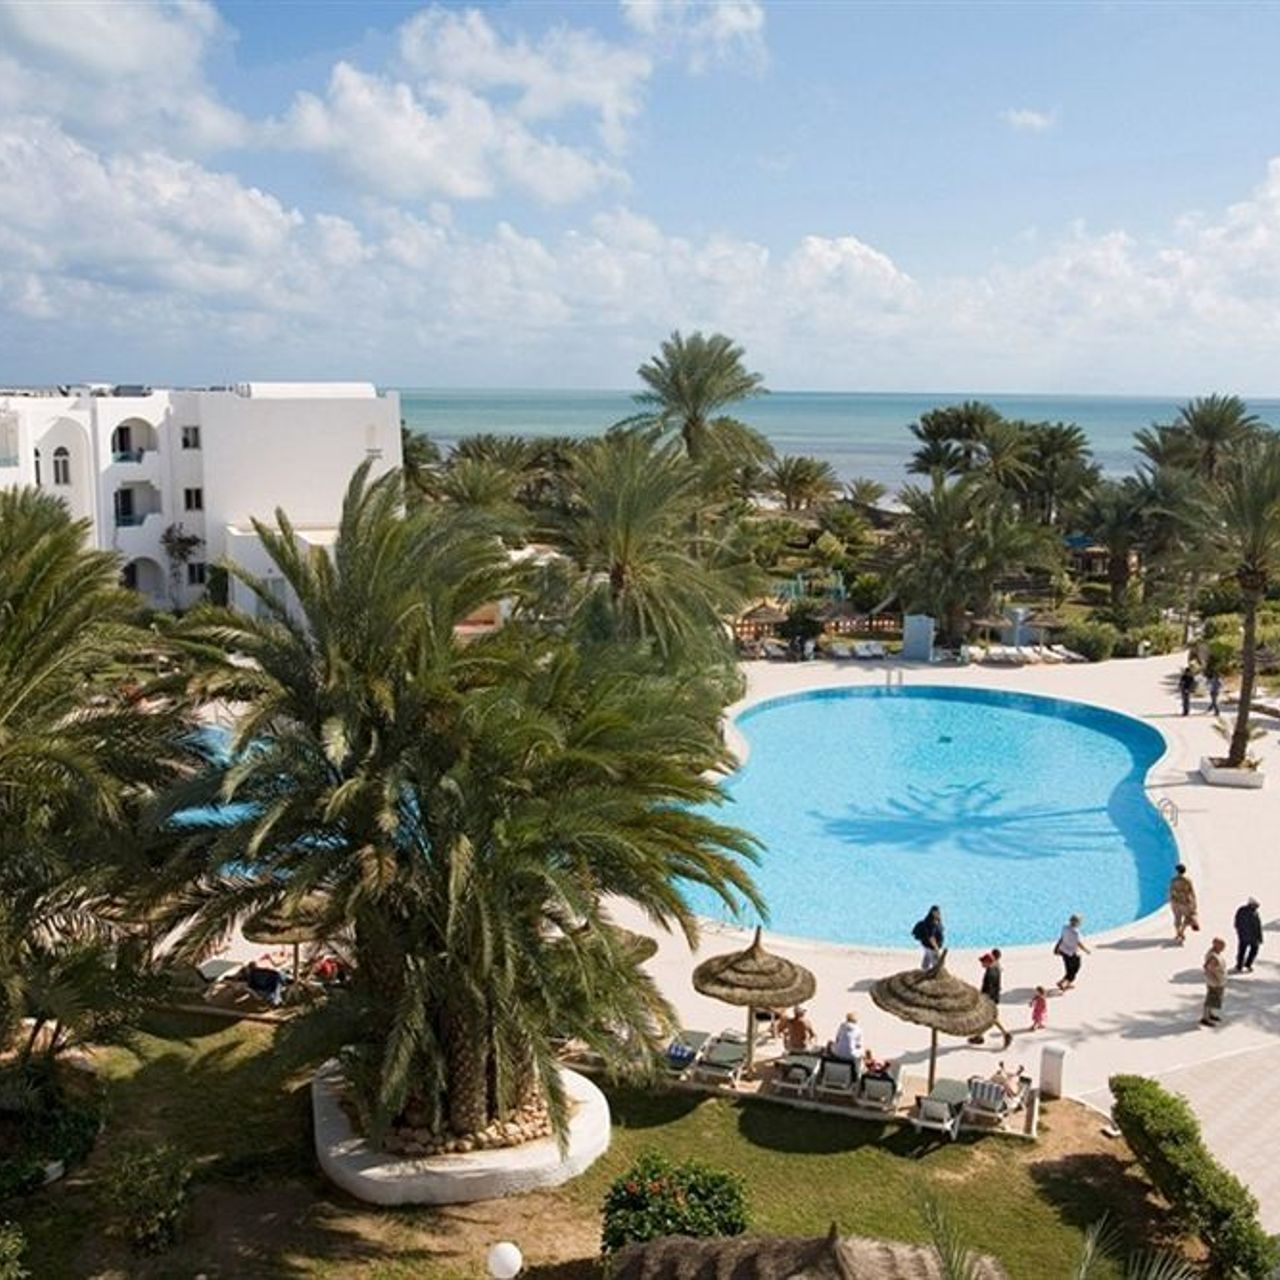 Hôtel Golf Beach - Aghir - Great prices at HOTEL INFO